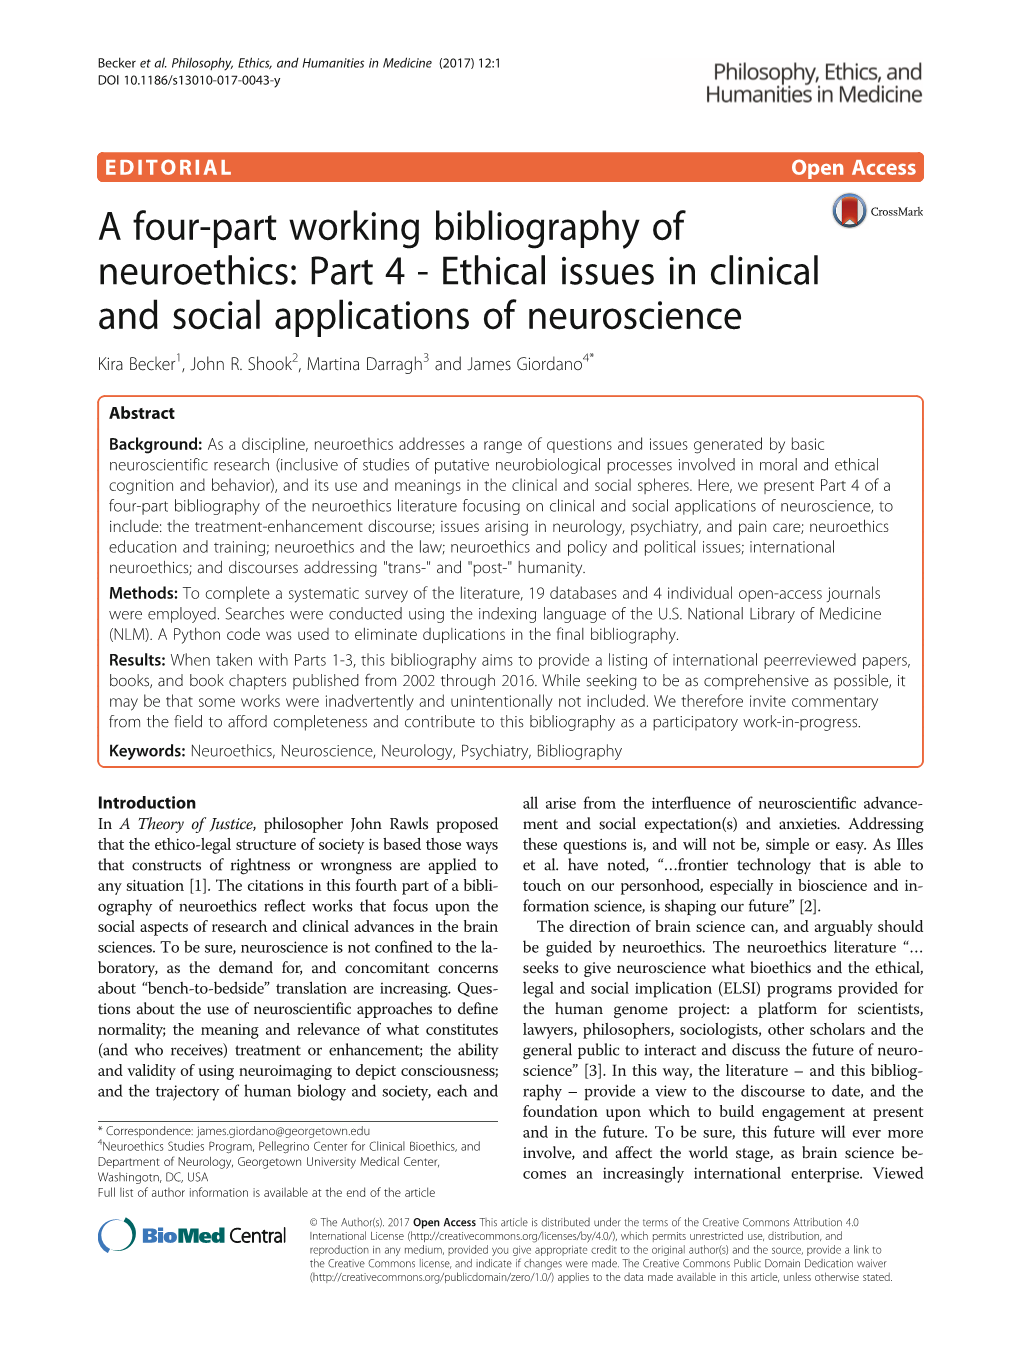 Ethical Issues in Clinical and Social Applications of Neuroscience Kira Becker1, John R